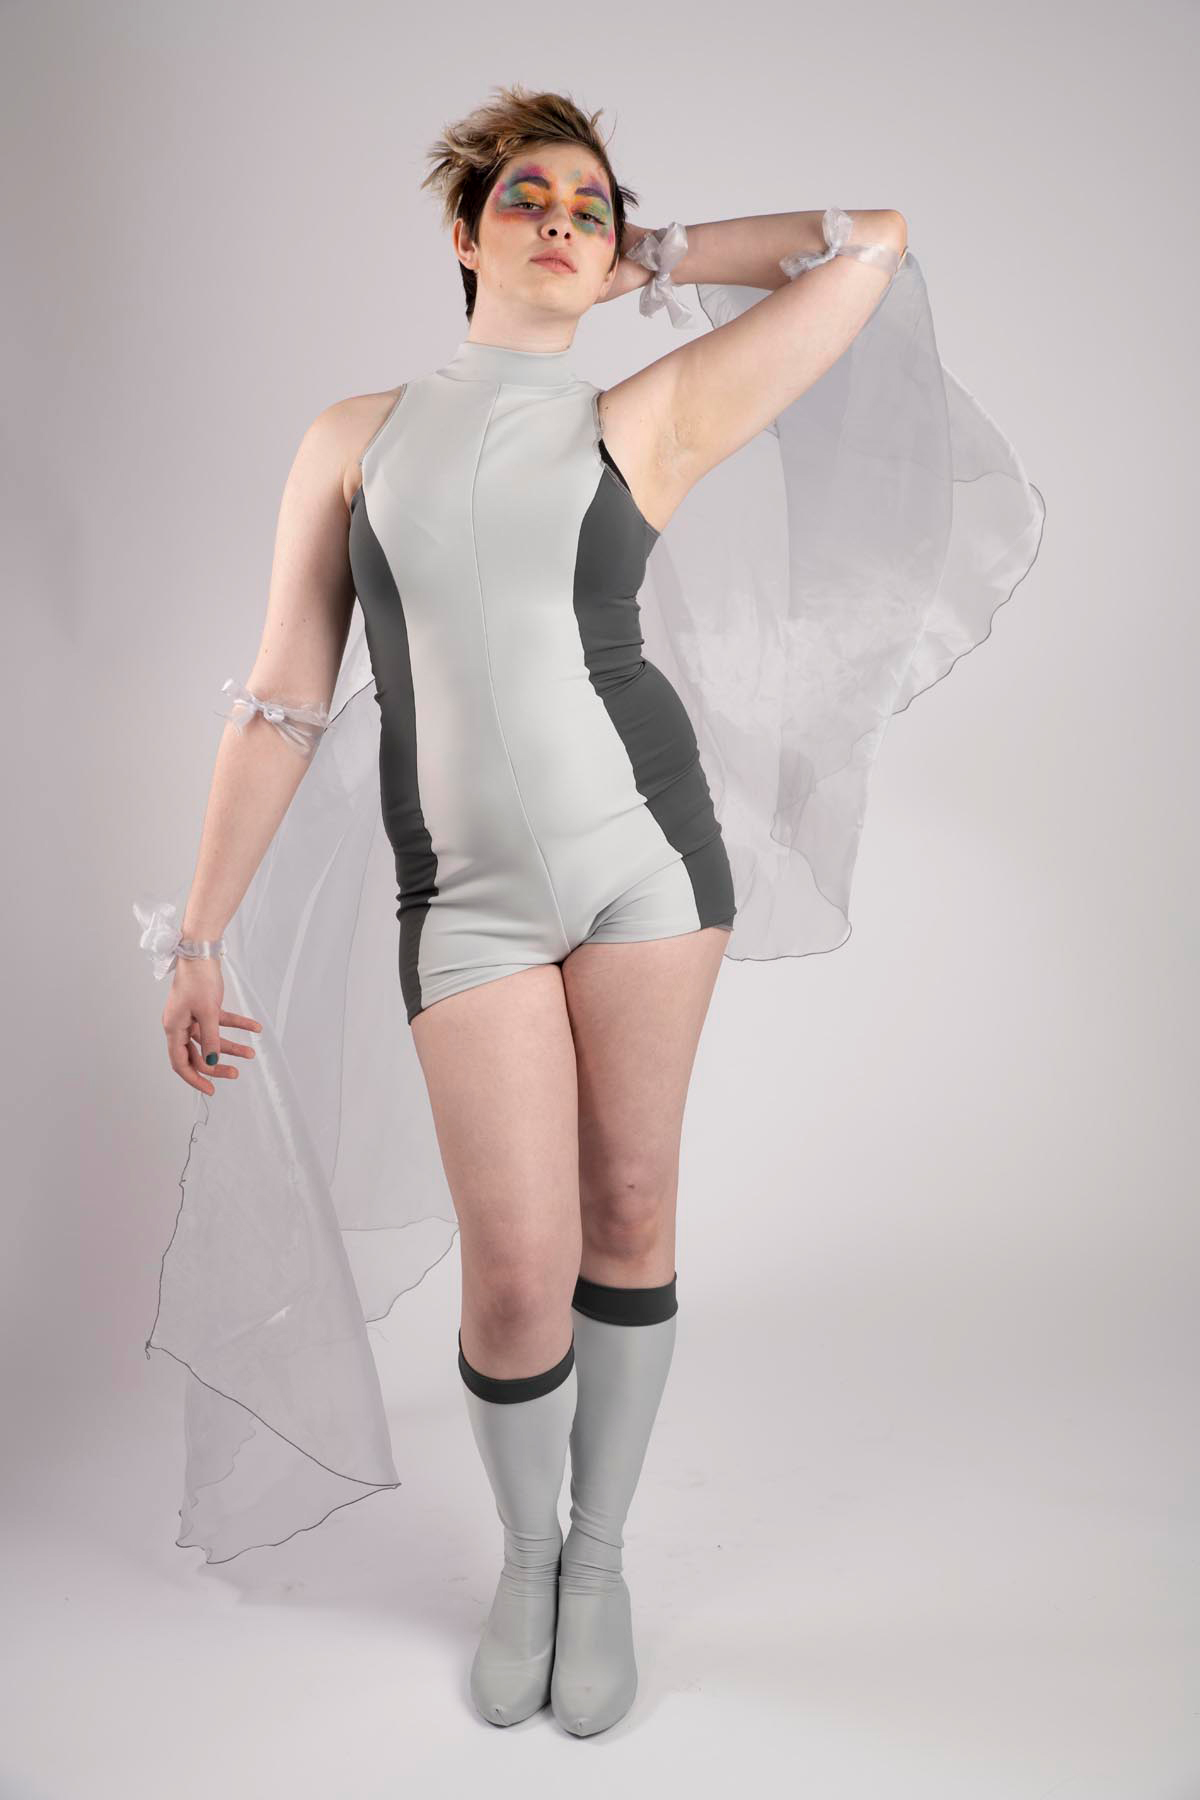 Jax Joel models a soft cloud grey and slate grey boyshort style bodysuit with knee-high boots and silver mirror organza.